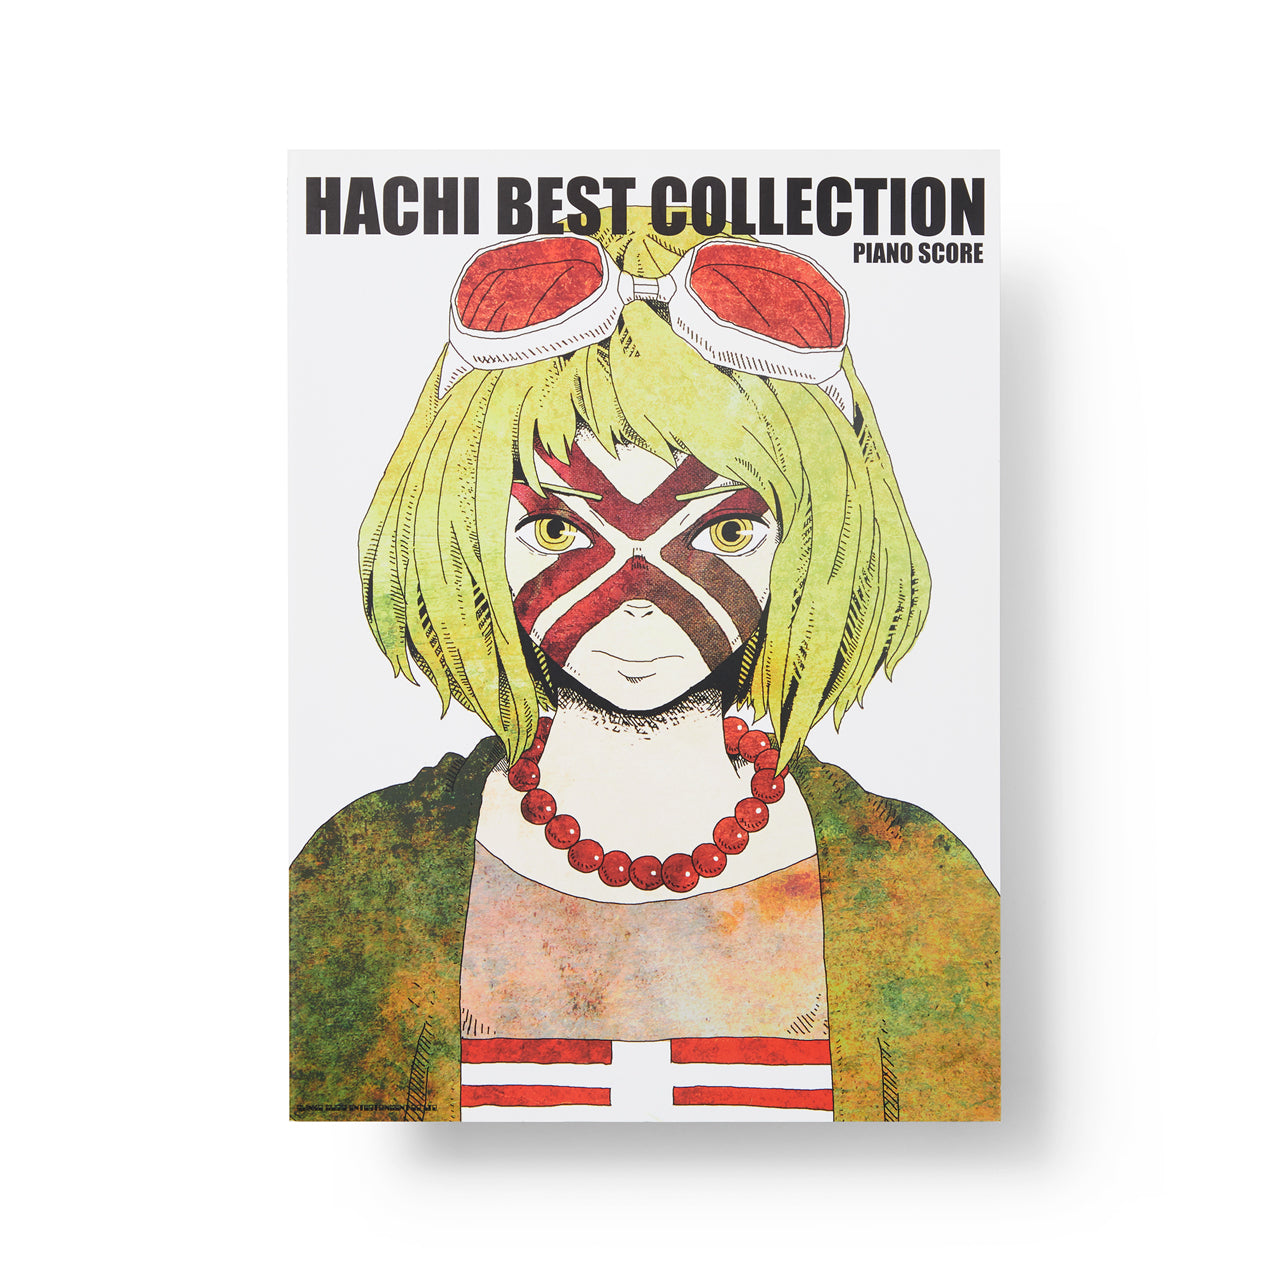 HACHI BEST COLLECTION -PIANO SCORE-